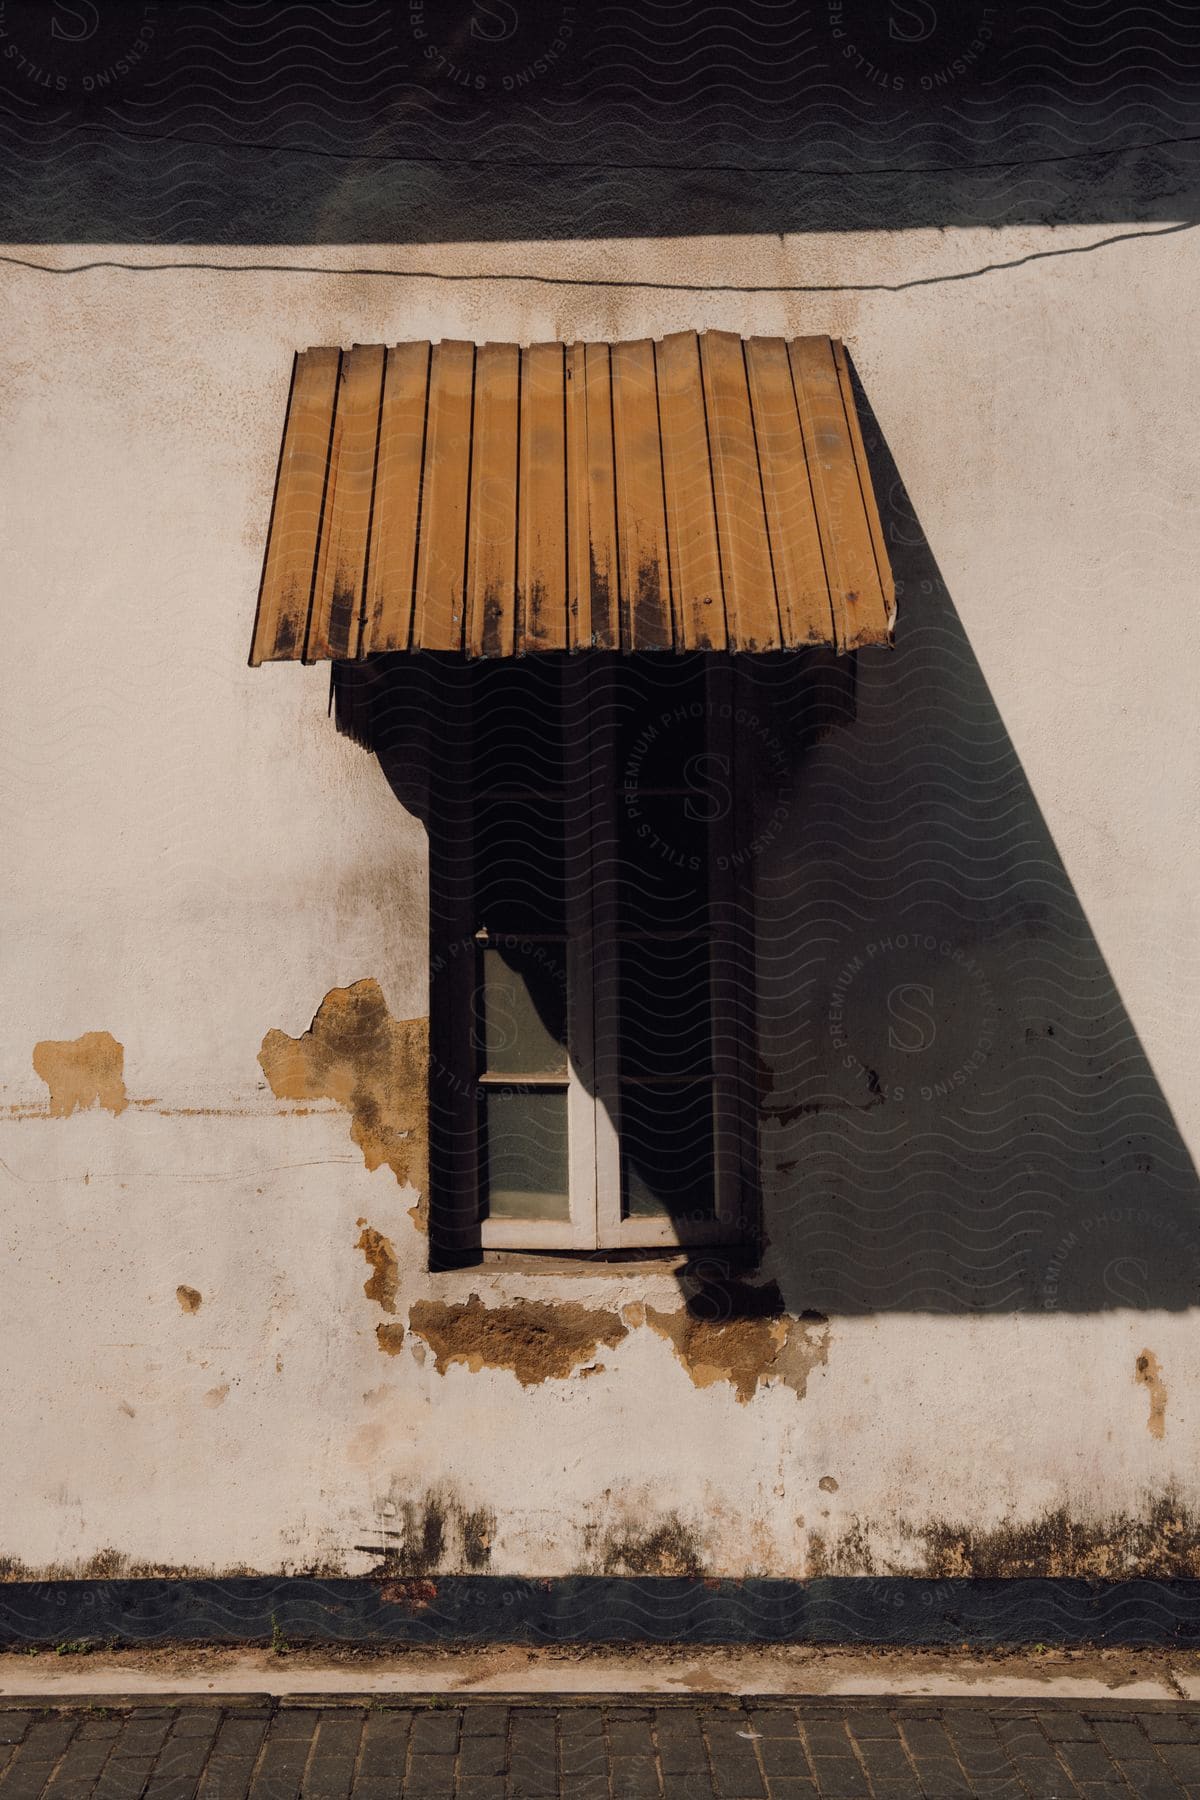 An old and worn window, with a wooden cover above, on an old decaying house.